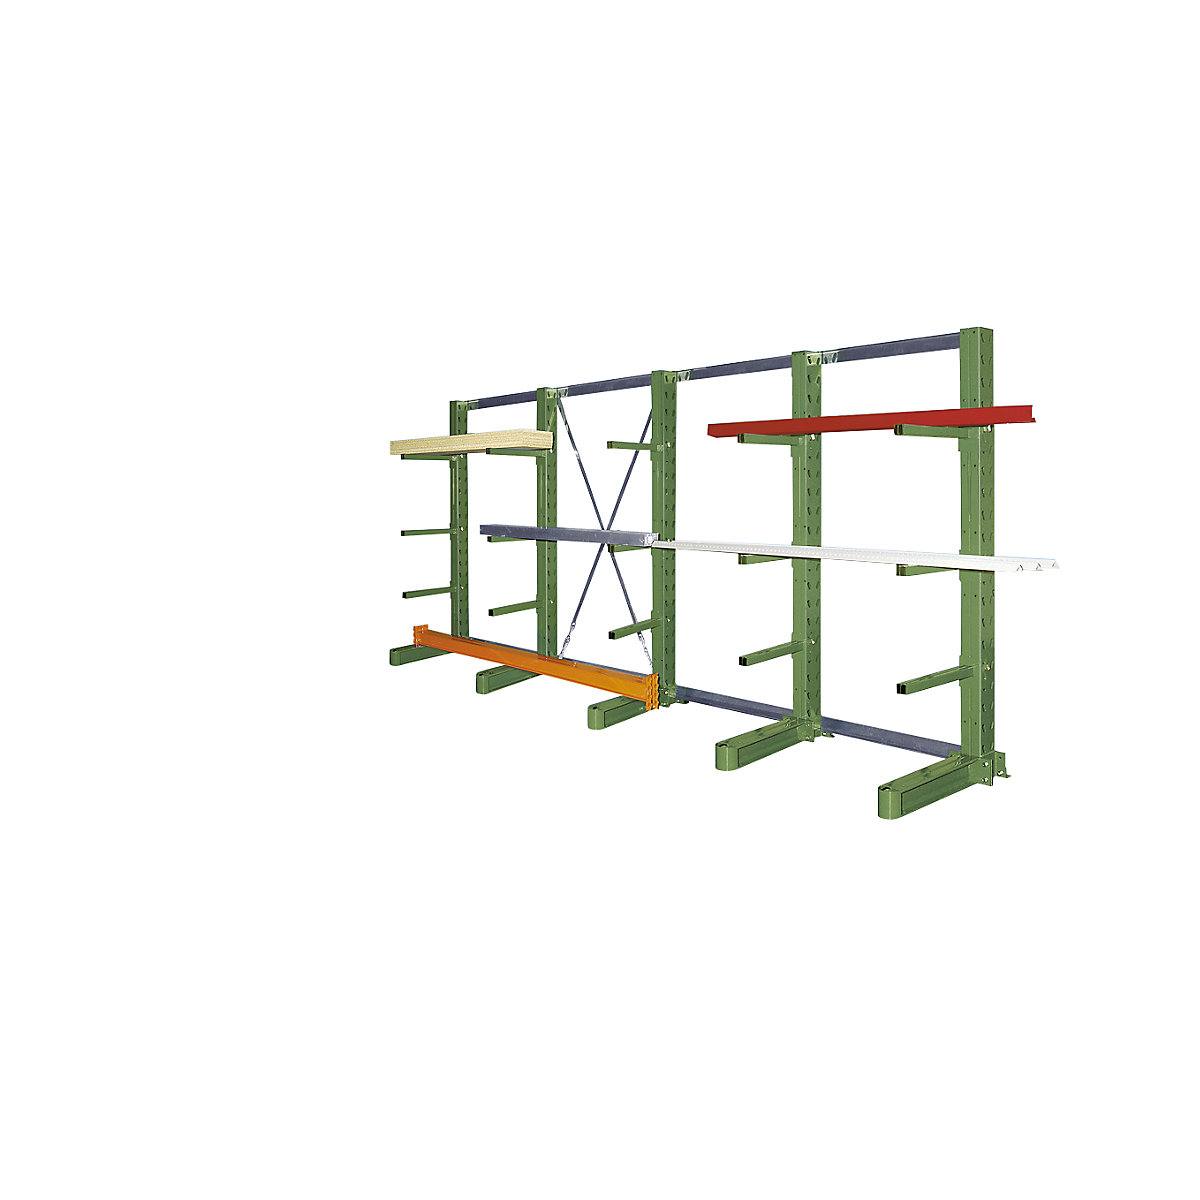 Complete cantilever racking unit – eurokraft pro, stand height 2100 mm, length 4100 mm, depth 400 mm, single sided, green-1